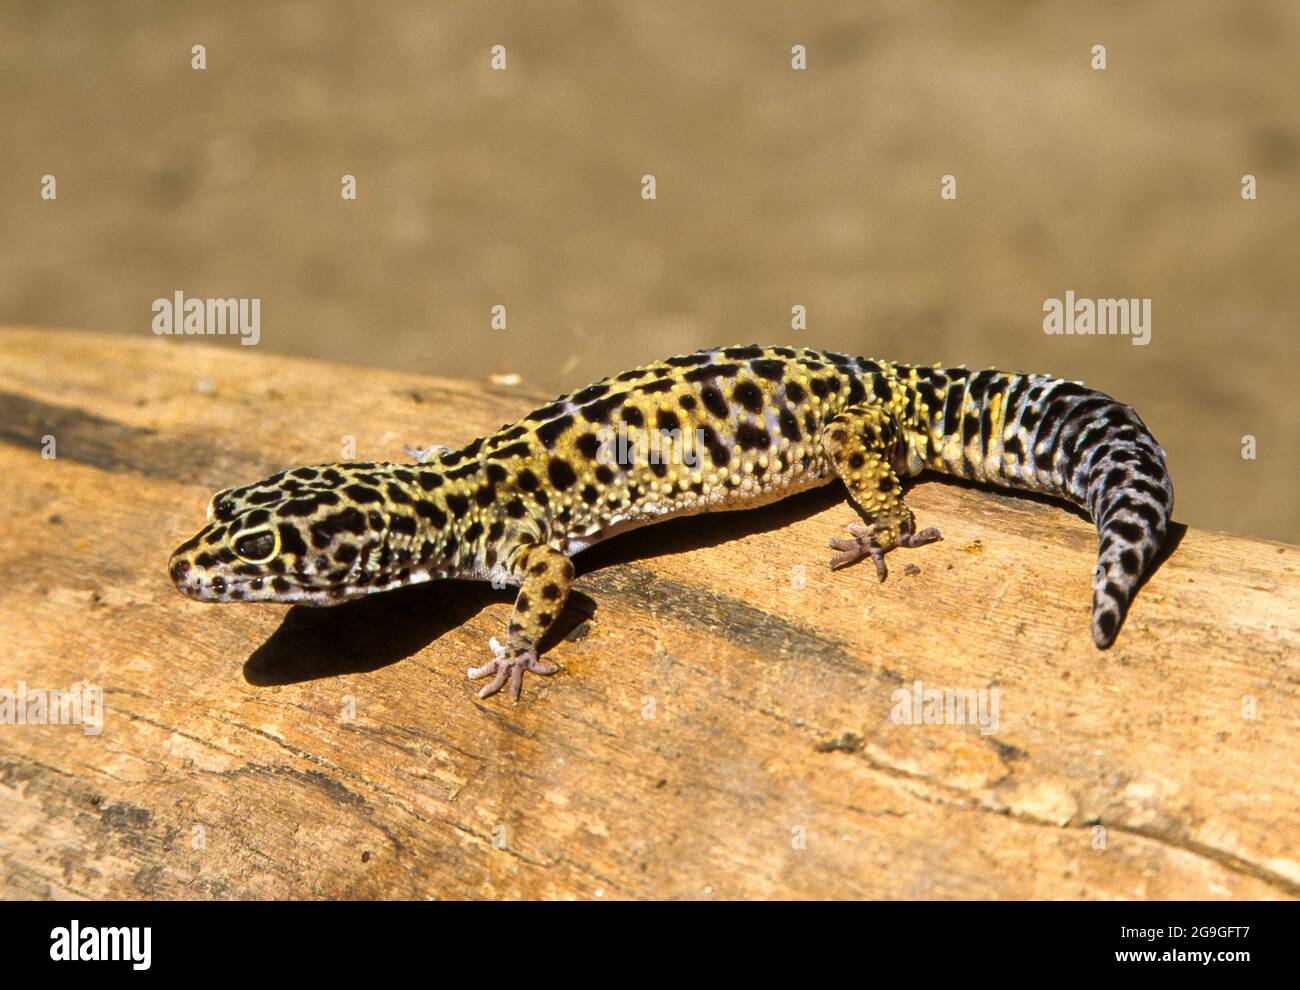 The common leopard gecko (Eublepharis macularius) The leopard gecko is a ground-dwelling lizard found in the deserts and arid grasslands of Iran, Afgh Stock Photo